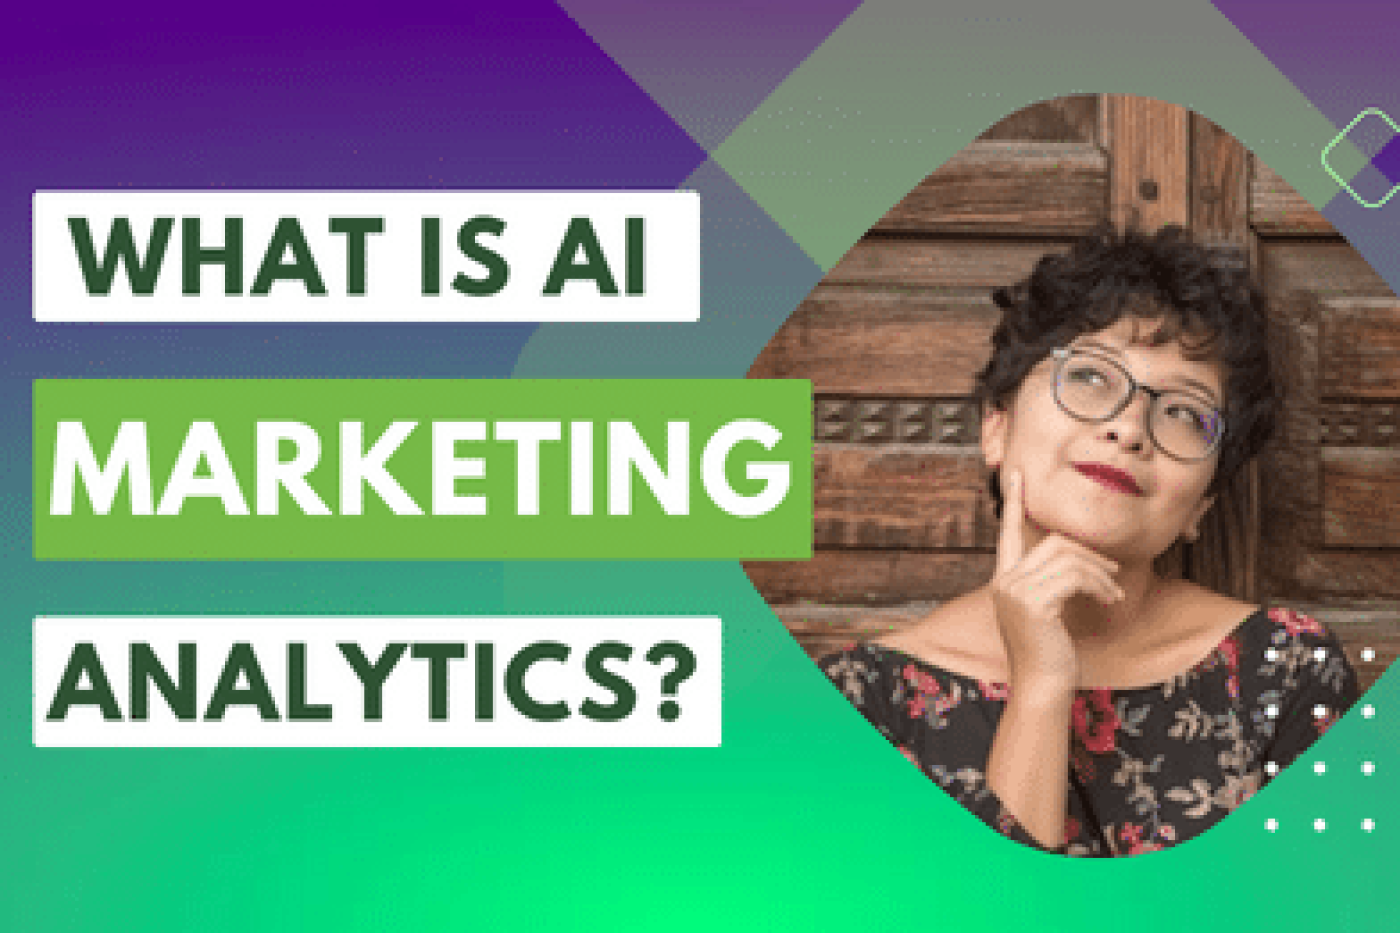 What Is an AI Marketing Analytics?